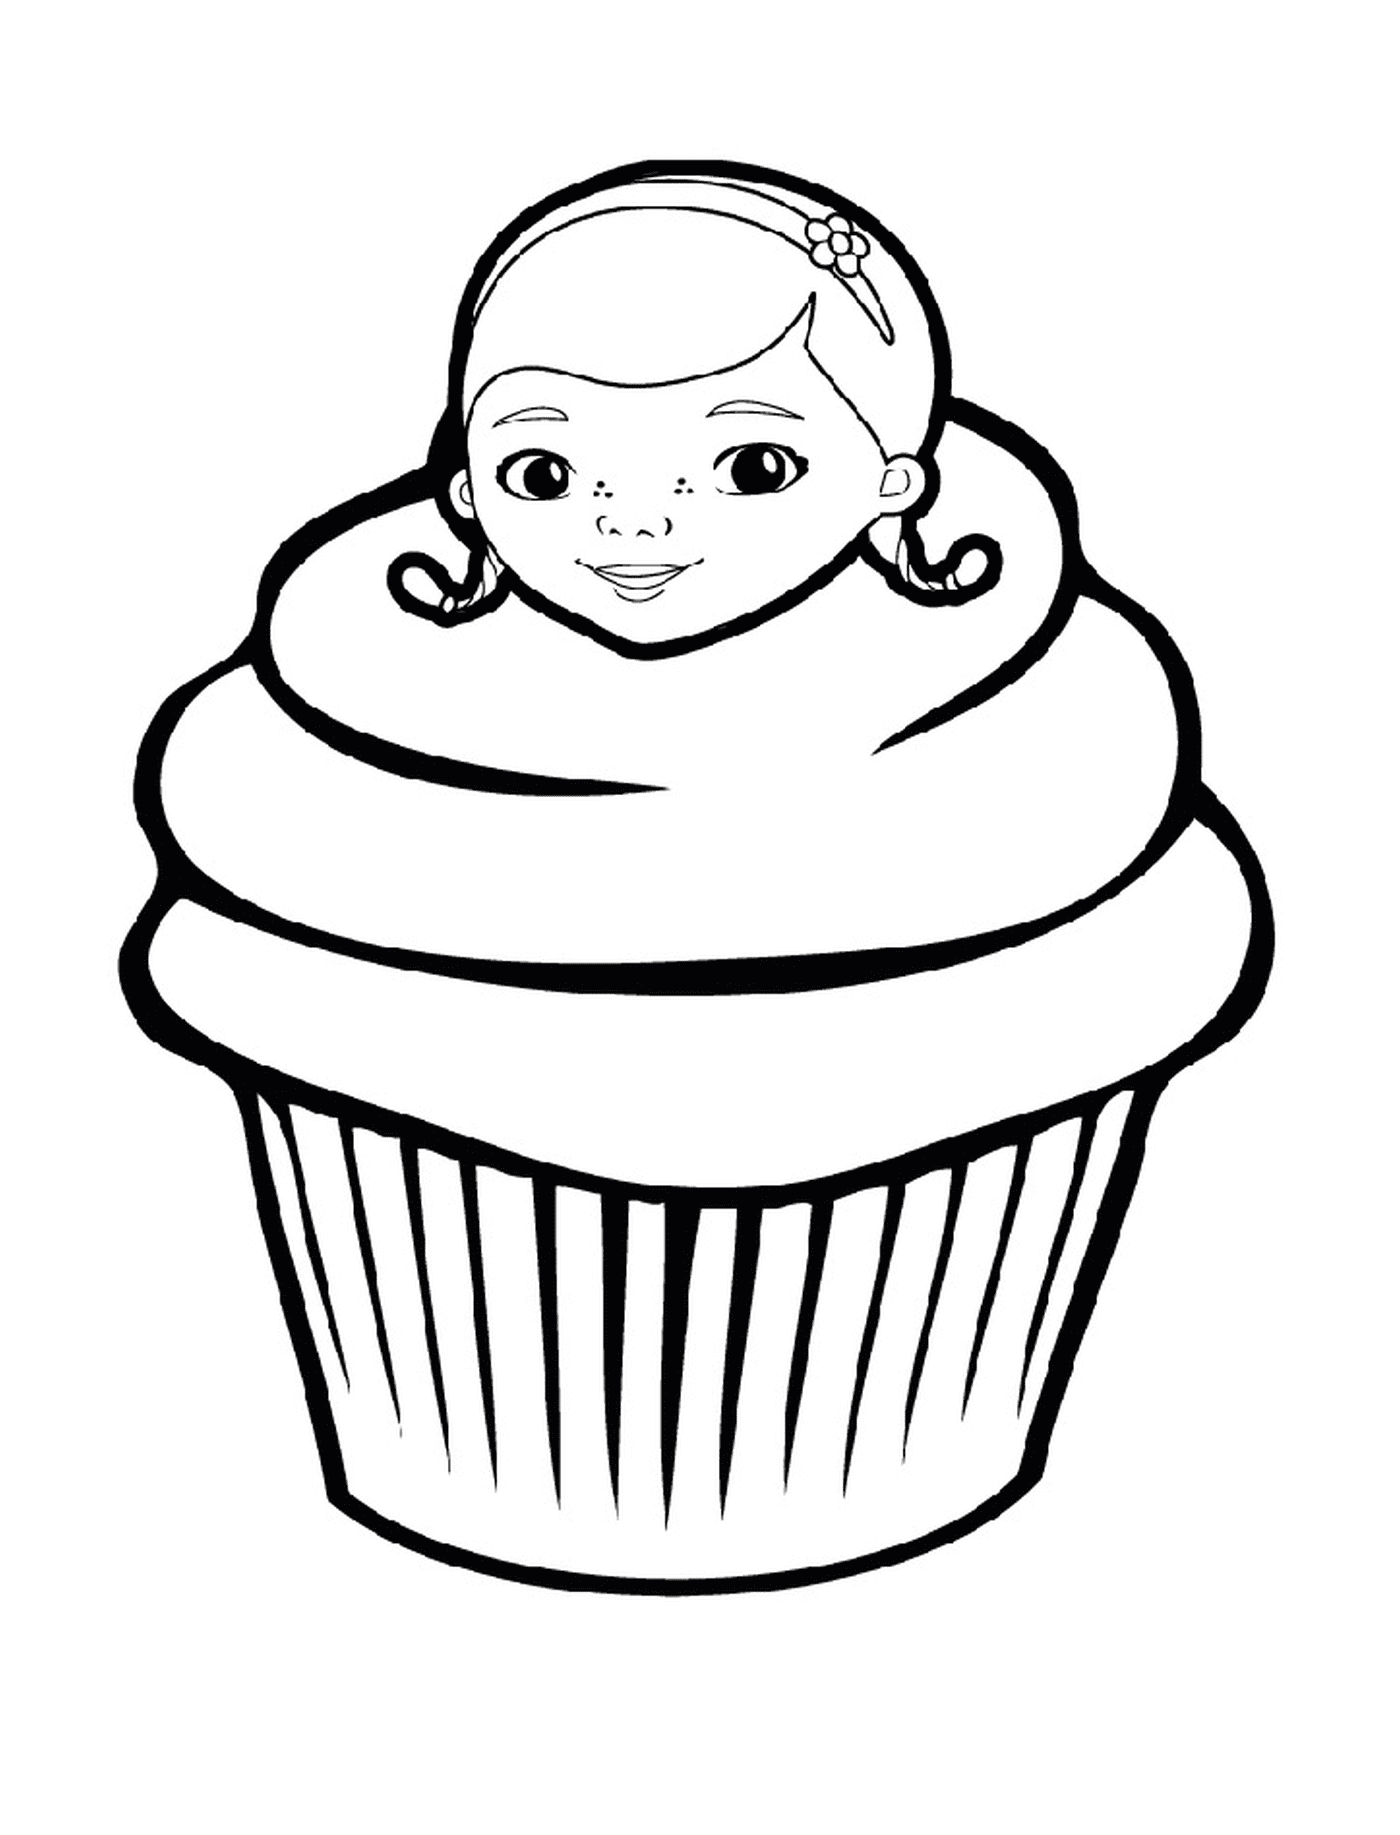  A cupcake from Doc McStuffins, with a woman's face 